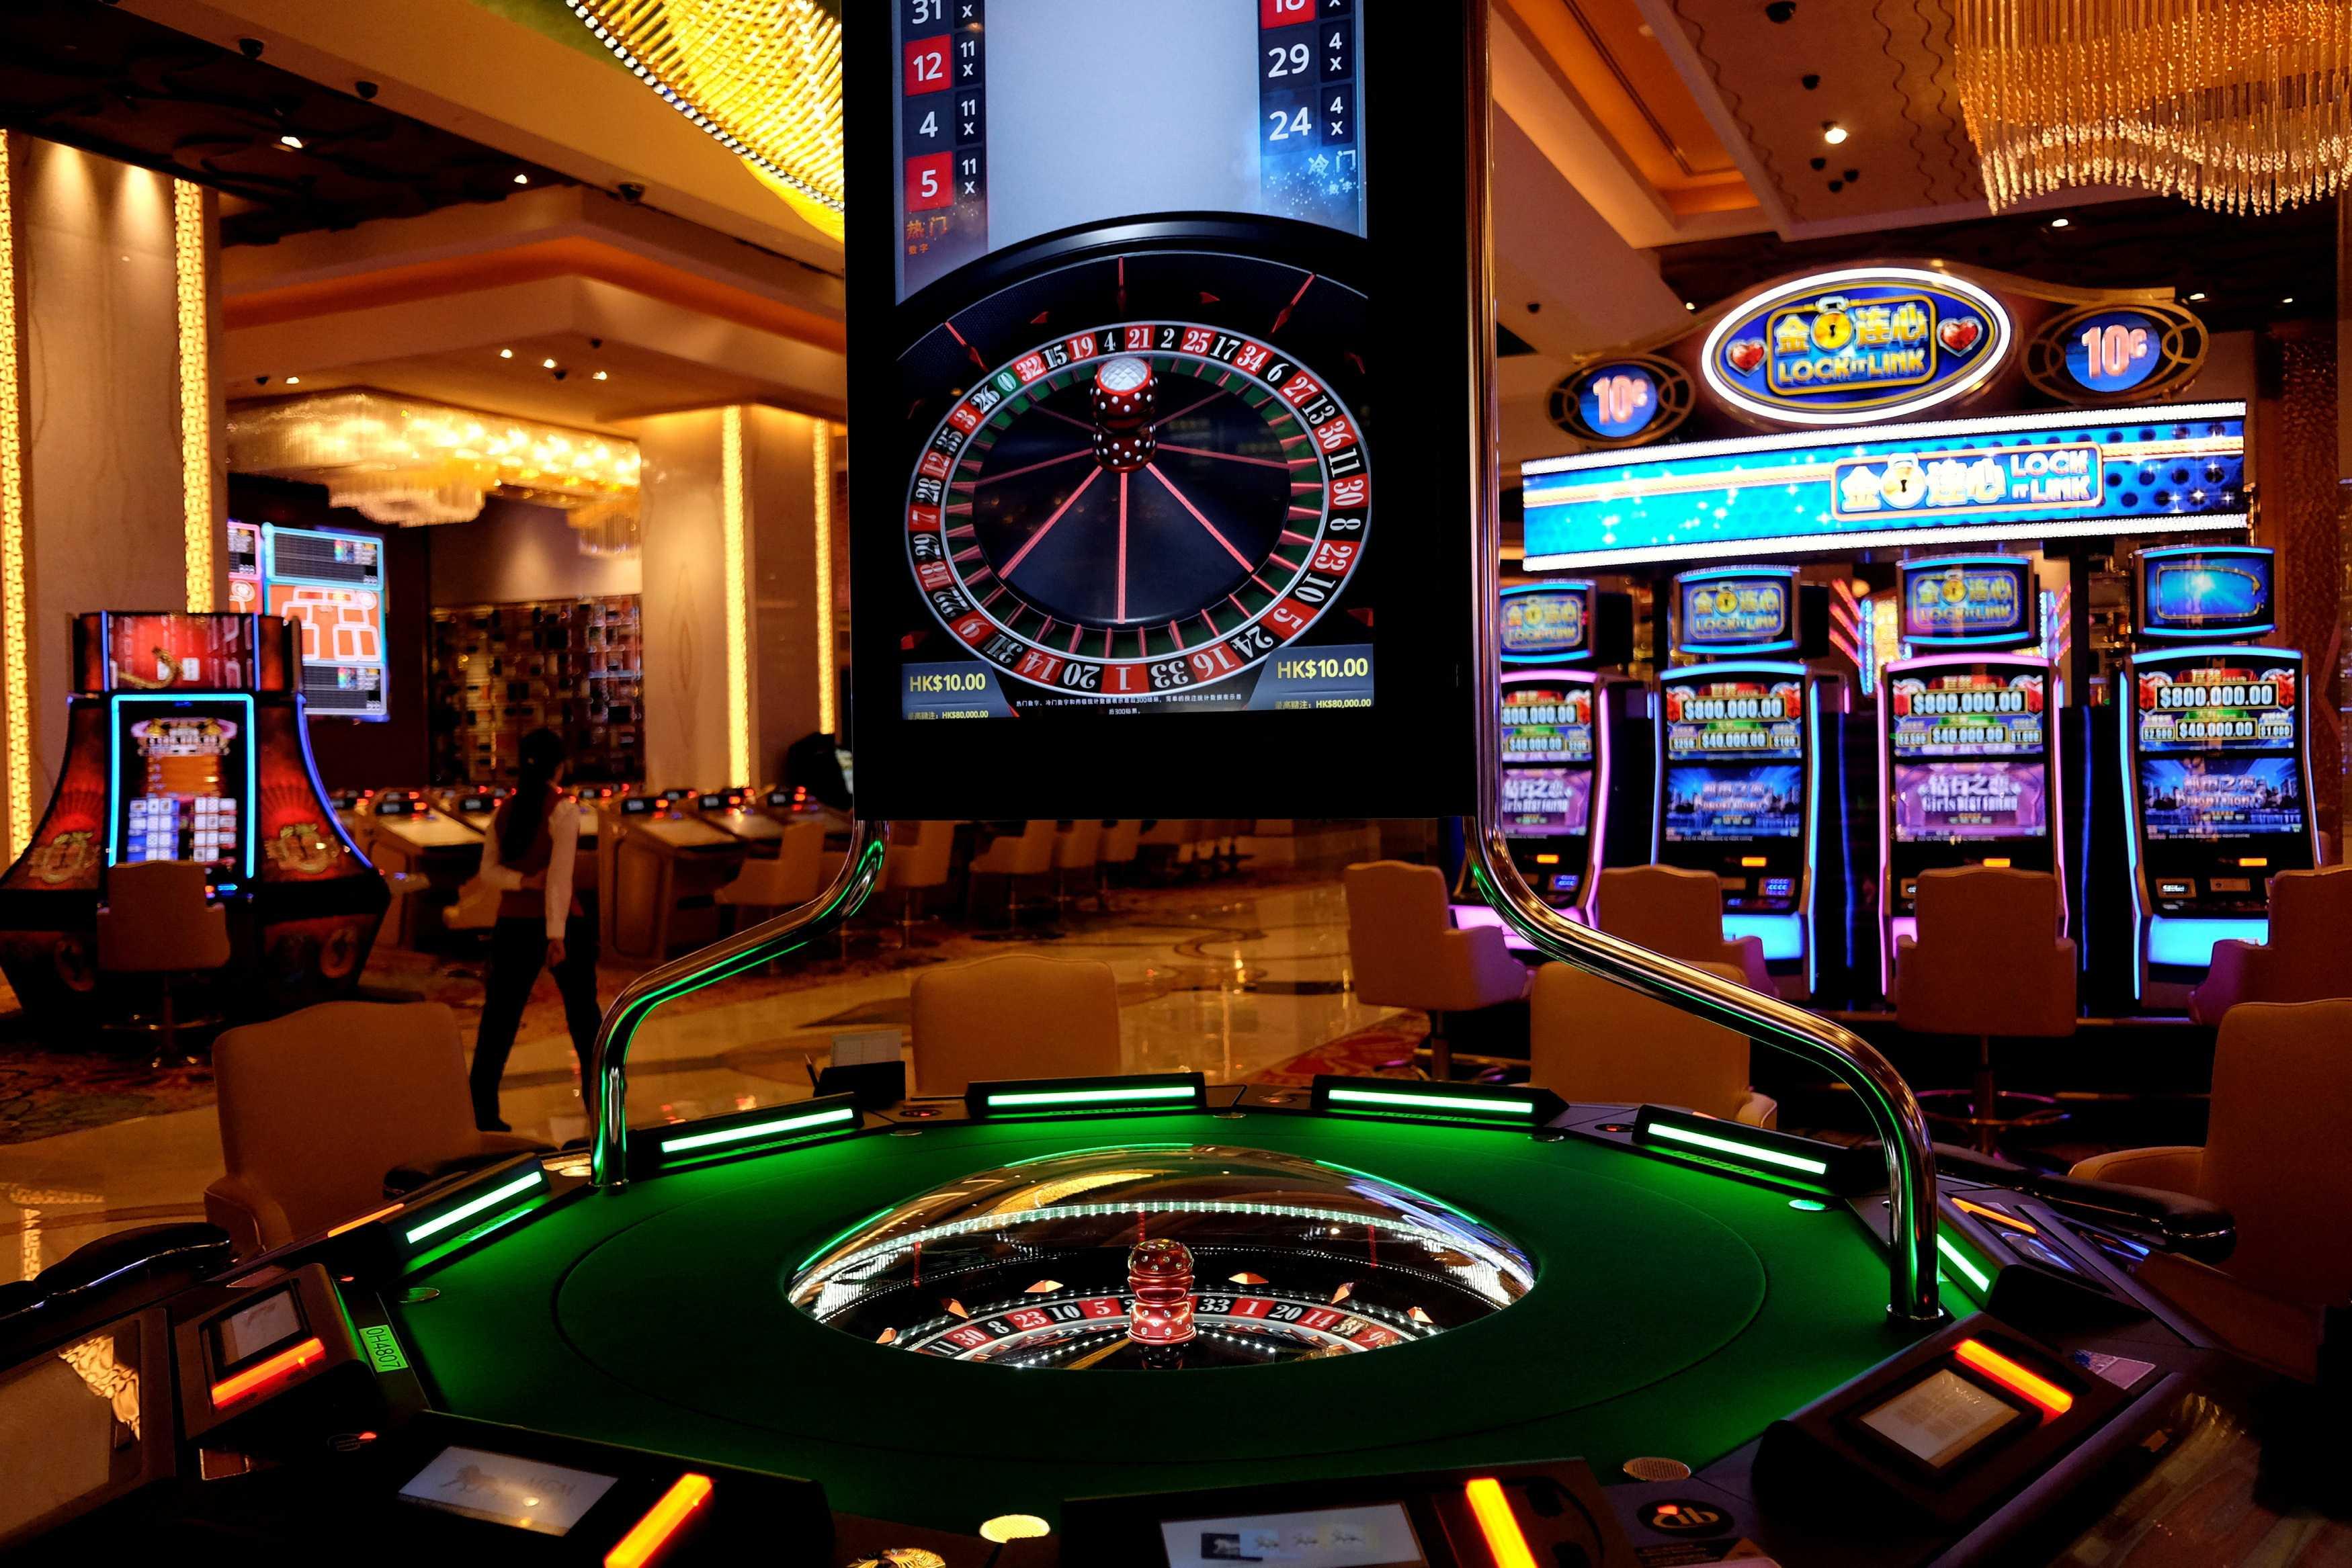 Gaming machines are seen at the casino of MGM Cotai in Macau, China Feb 13, 2018. Photo: Reuters